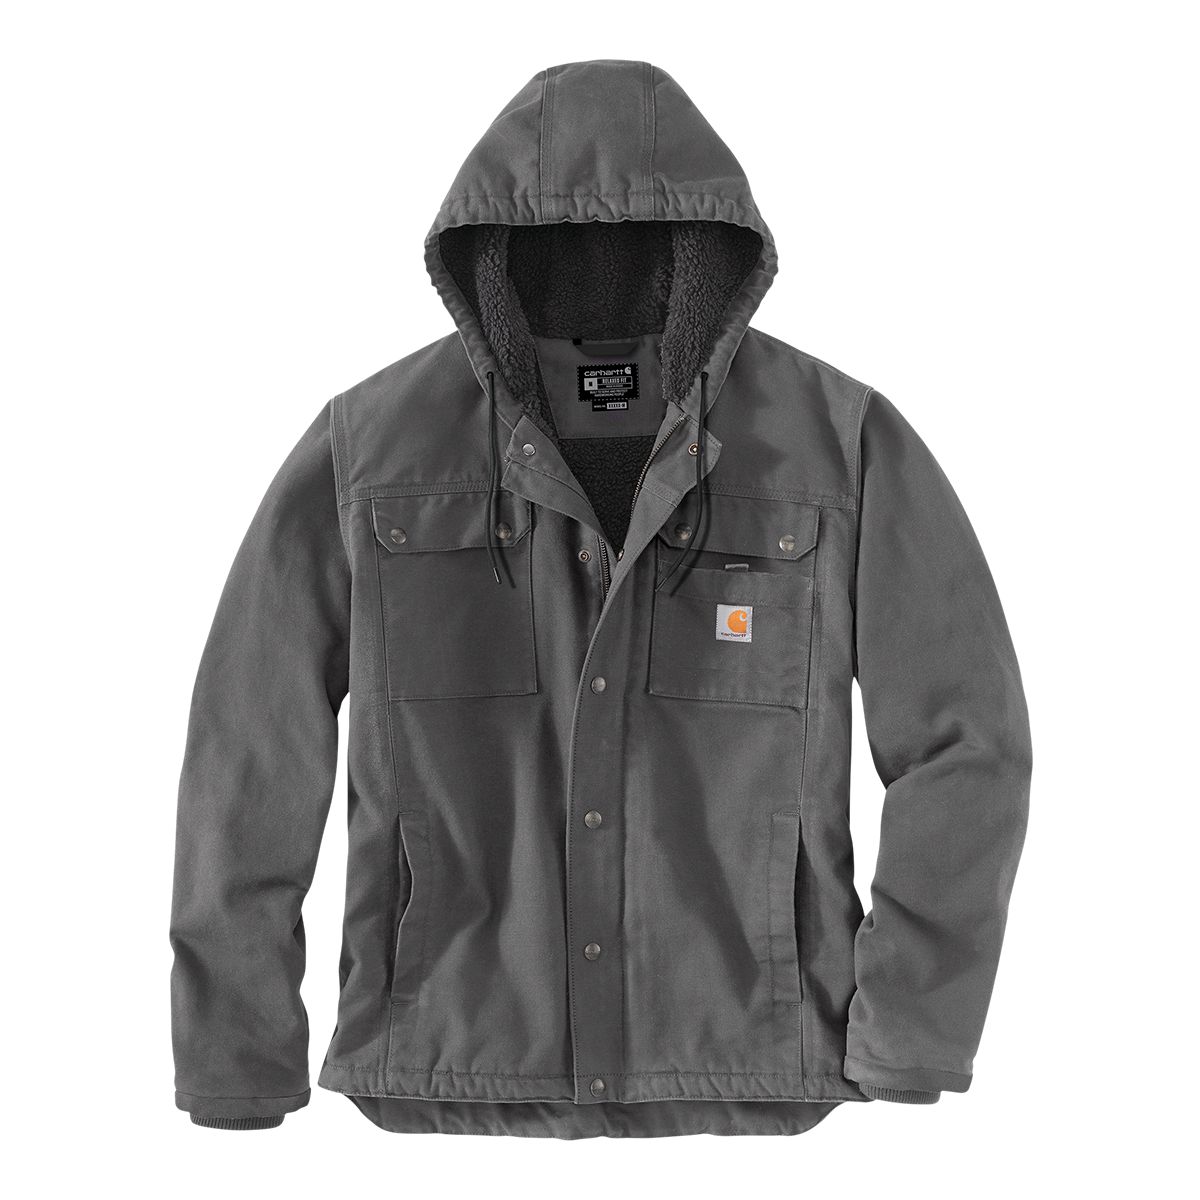 Image of Carhartt Men's Washed Duck Sherpa Lined Utility Jacket